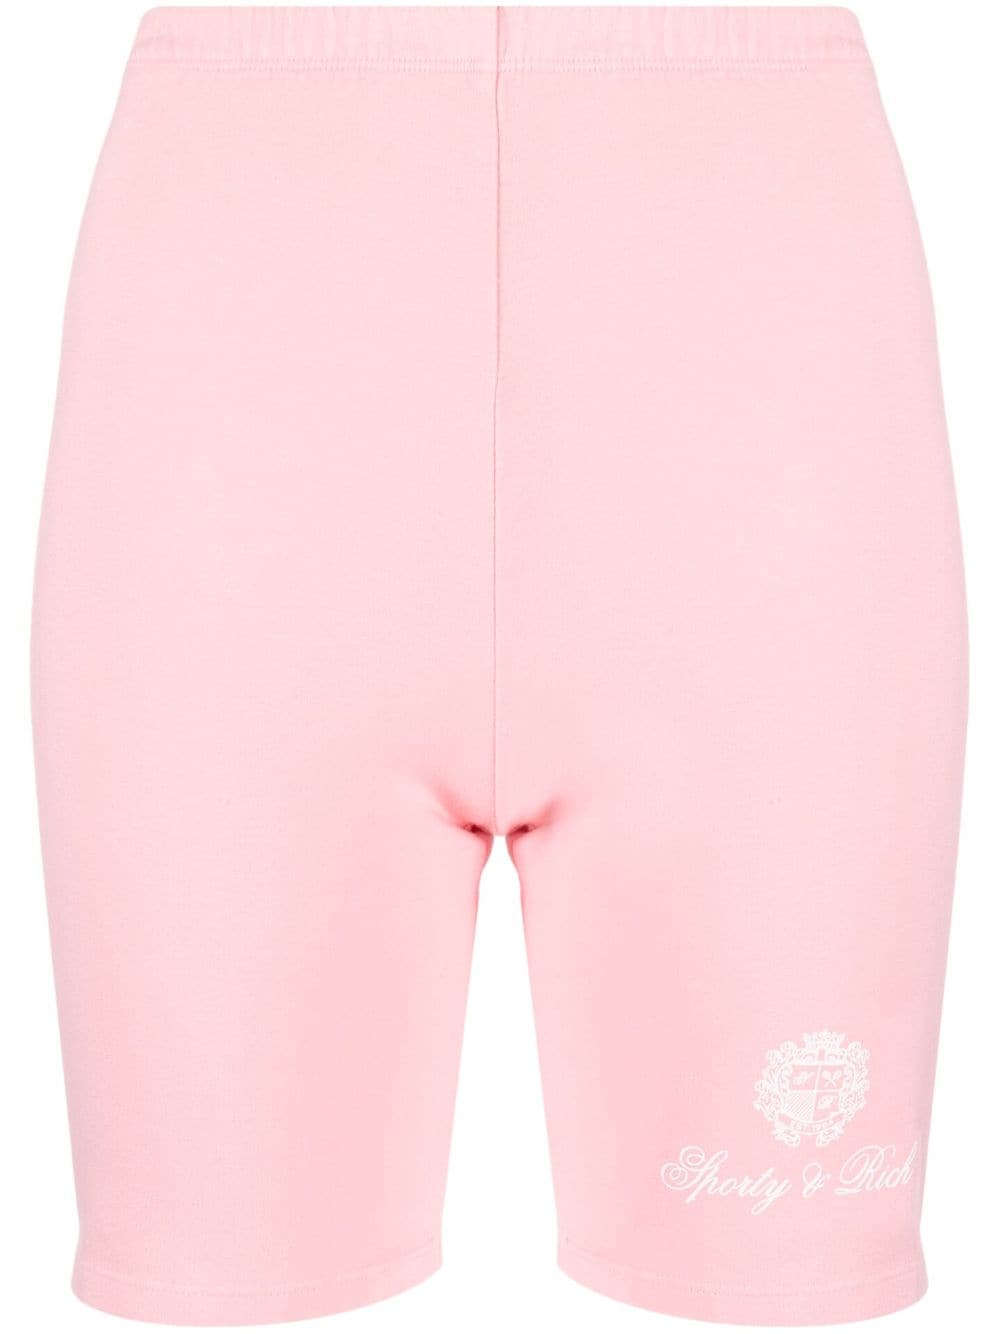 Sporty & Rich Shorts Pink